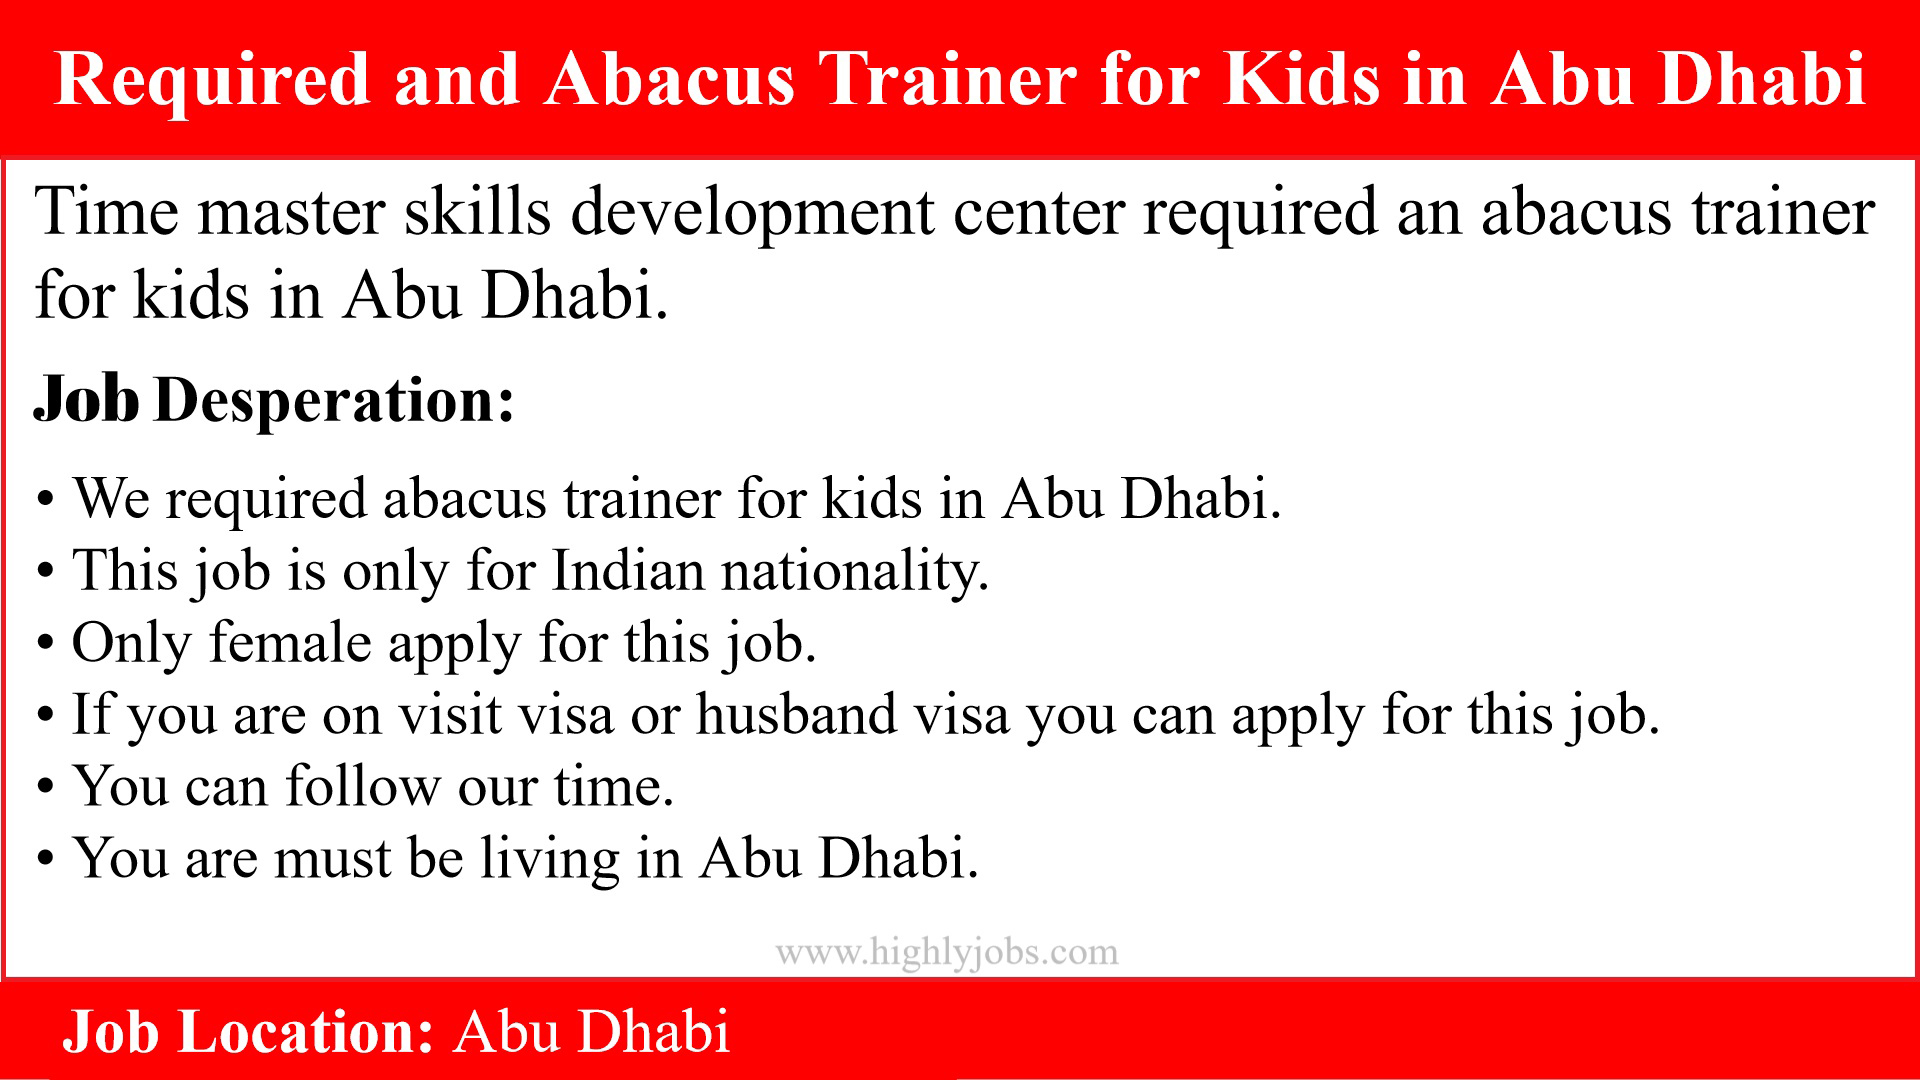 Required and Abacus Trainer for Kids in Abu Dhabi